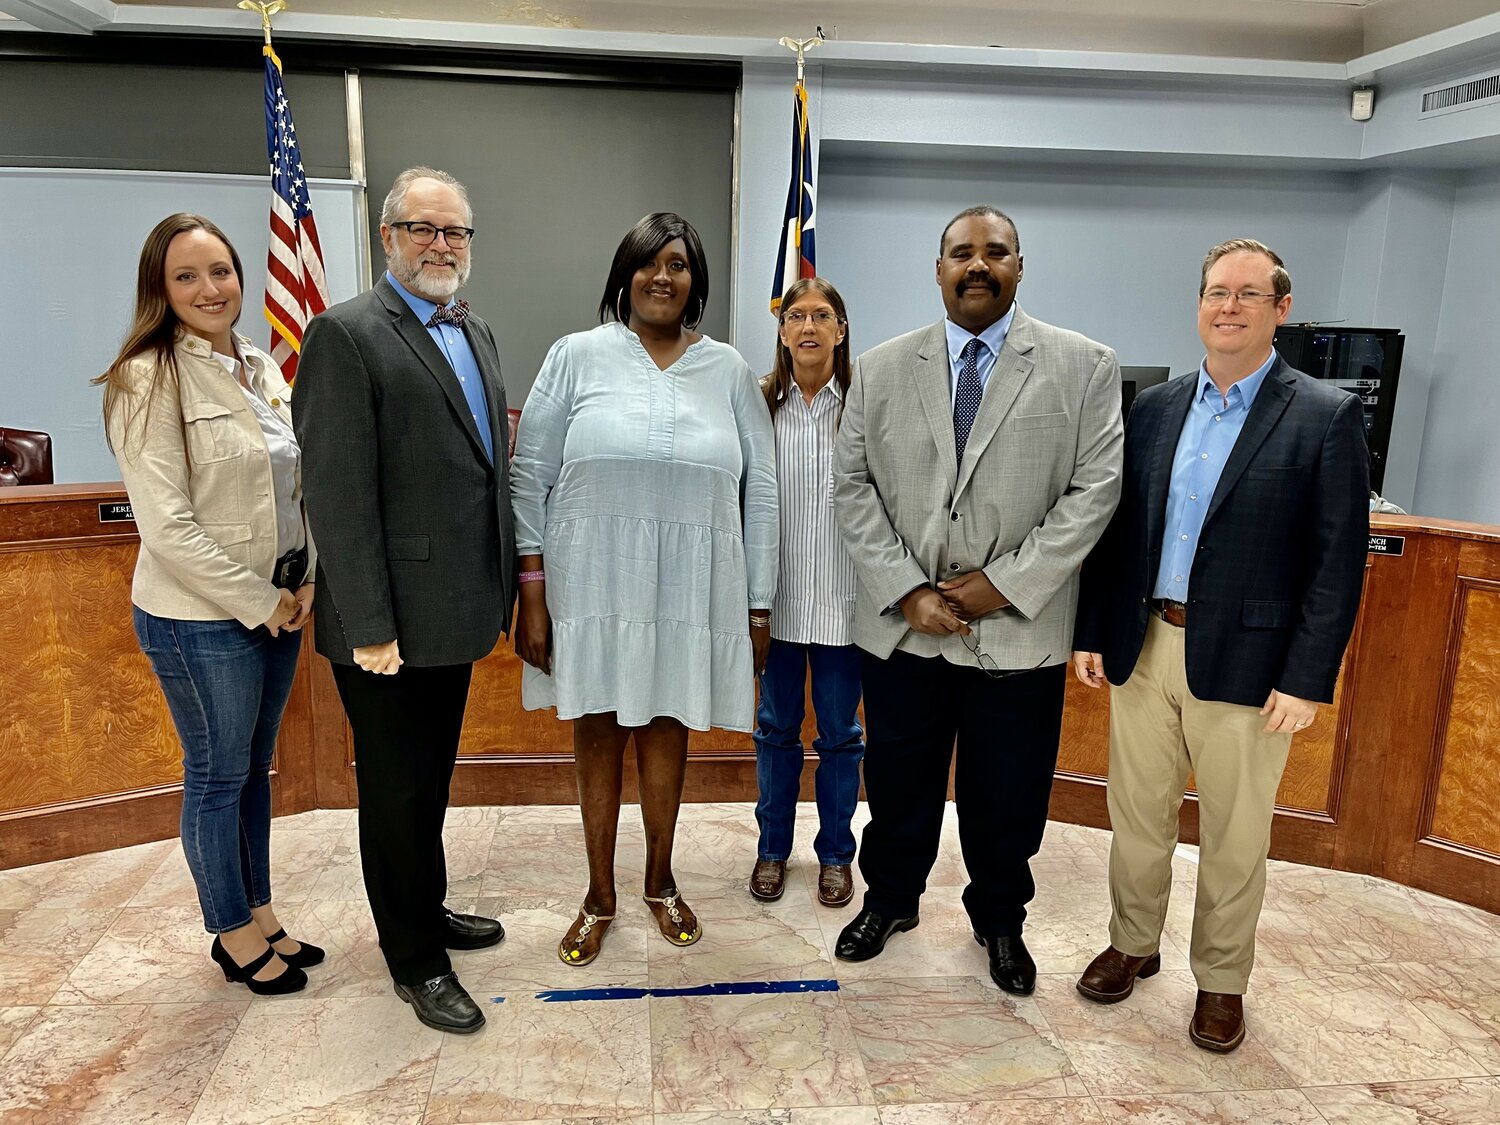 The Brookshire City Council poses for a photo following its May 11 meeting. Pictured are, left to right, Position 5 Alderwoman Amanda Neuendorf, Position 2 Alderman Troy McAnelly, Position 1 Alderwoman Monique Taylor, Position 3 Alderwoman Kim Branch, Mayor Darrell Branch and Position 4 Alderman and Mayor Pro Tem Jeremiah Hill.